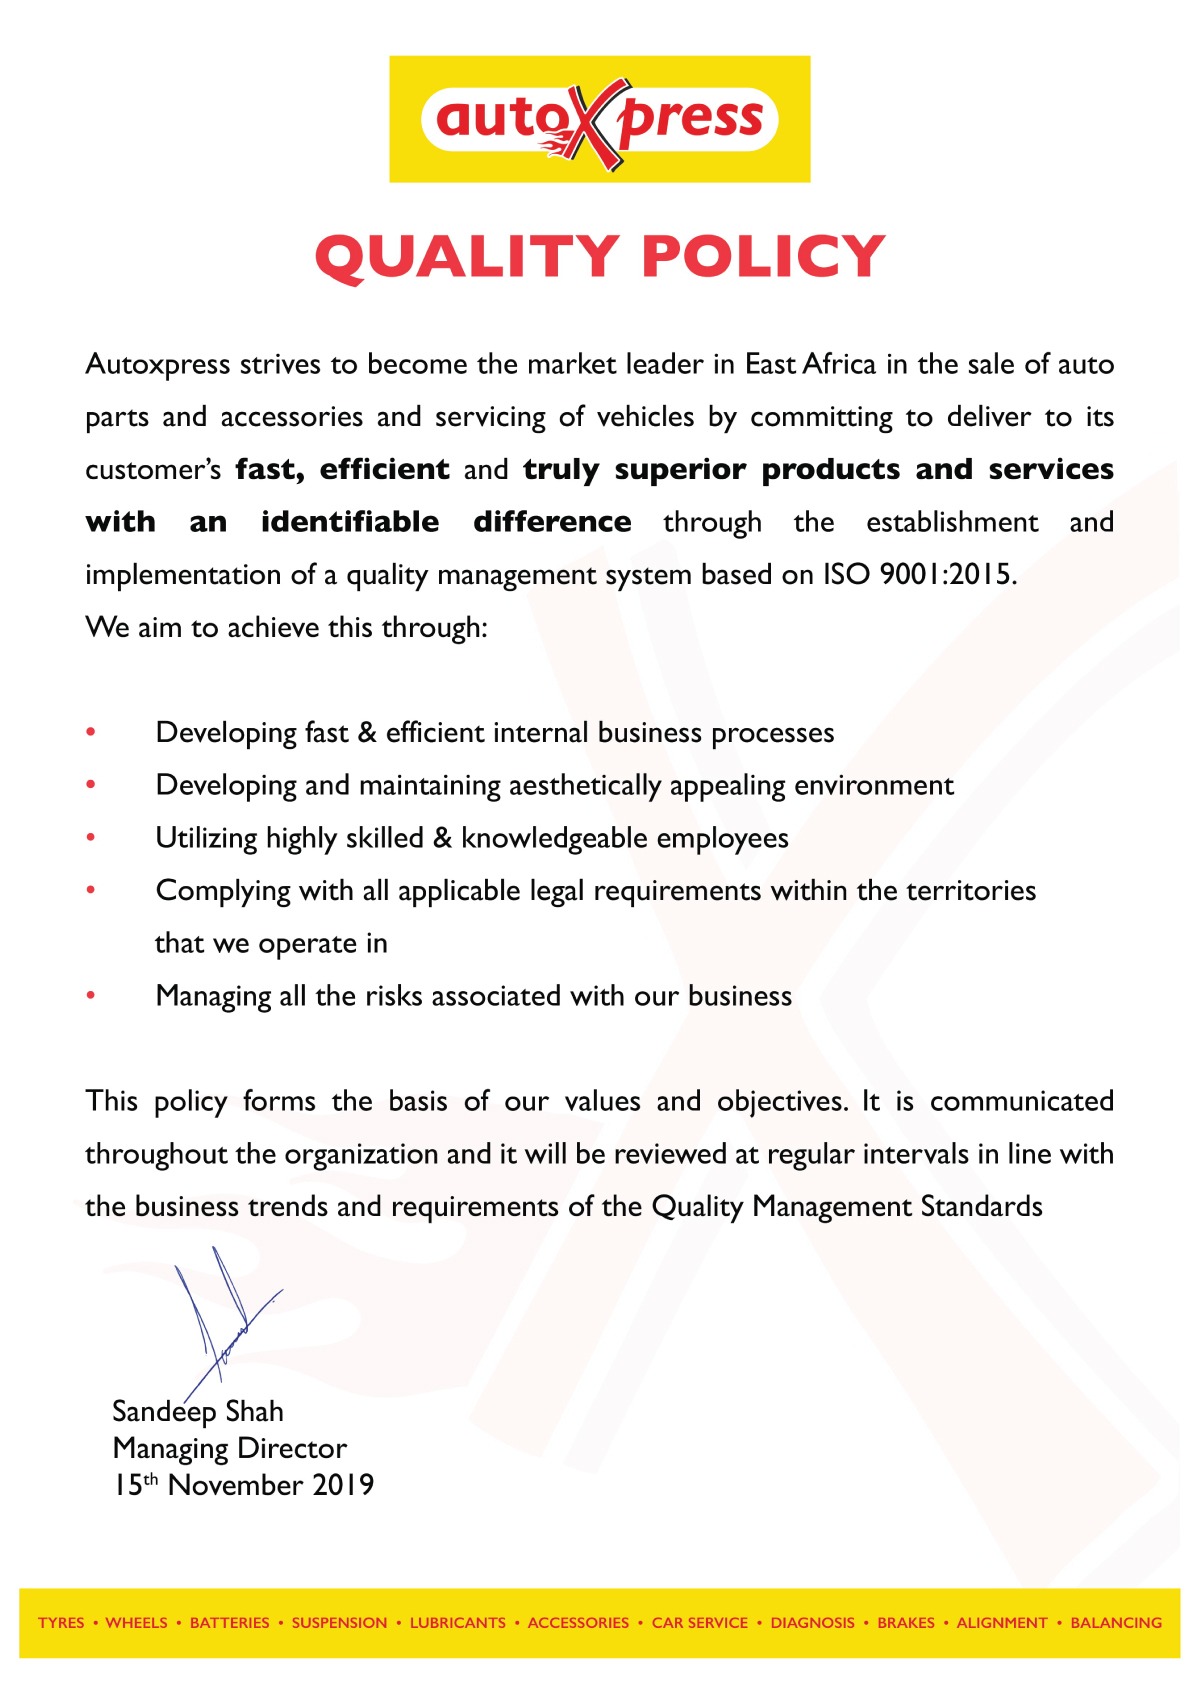 AutoXpress-Quality-Policy-2019